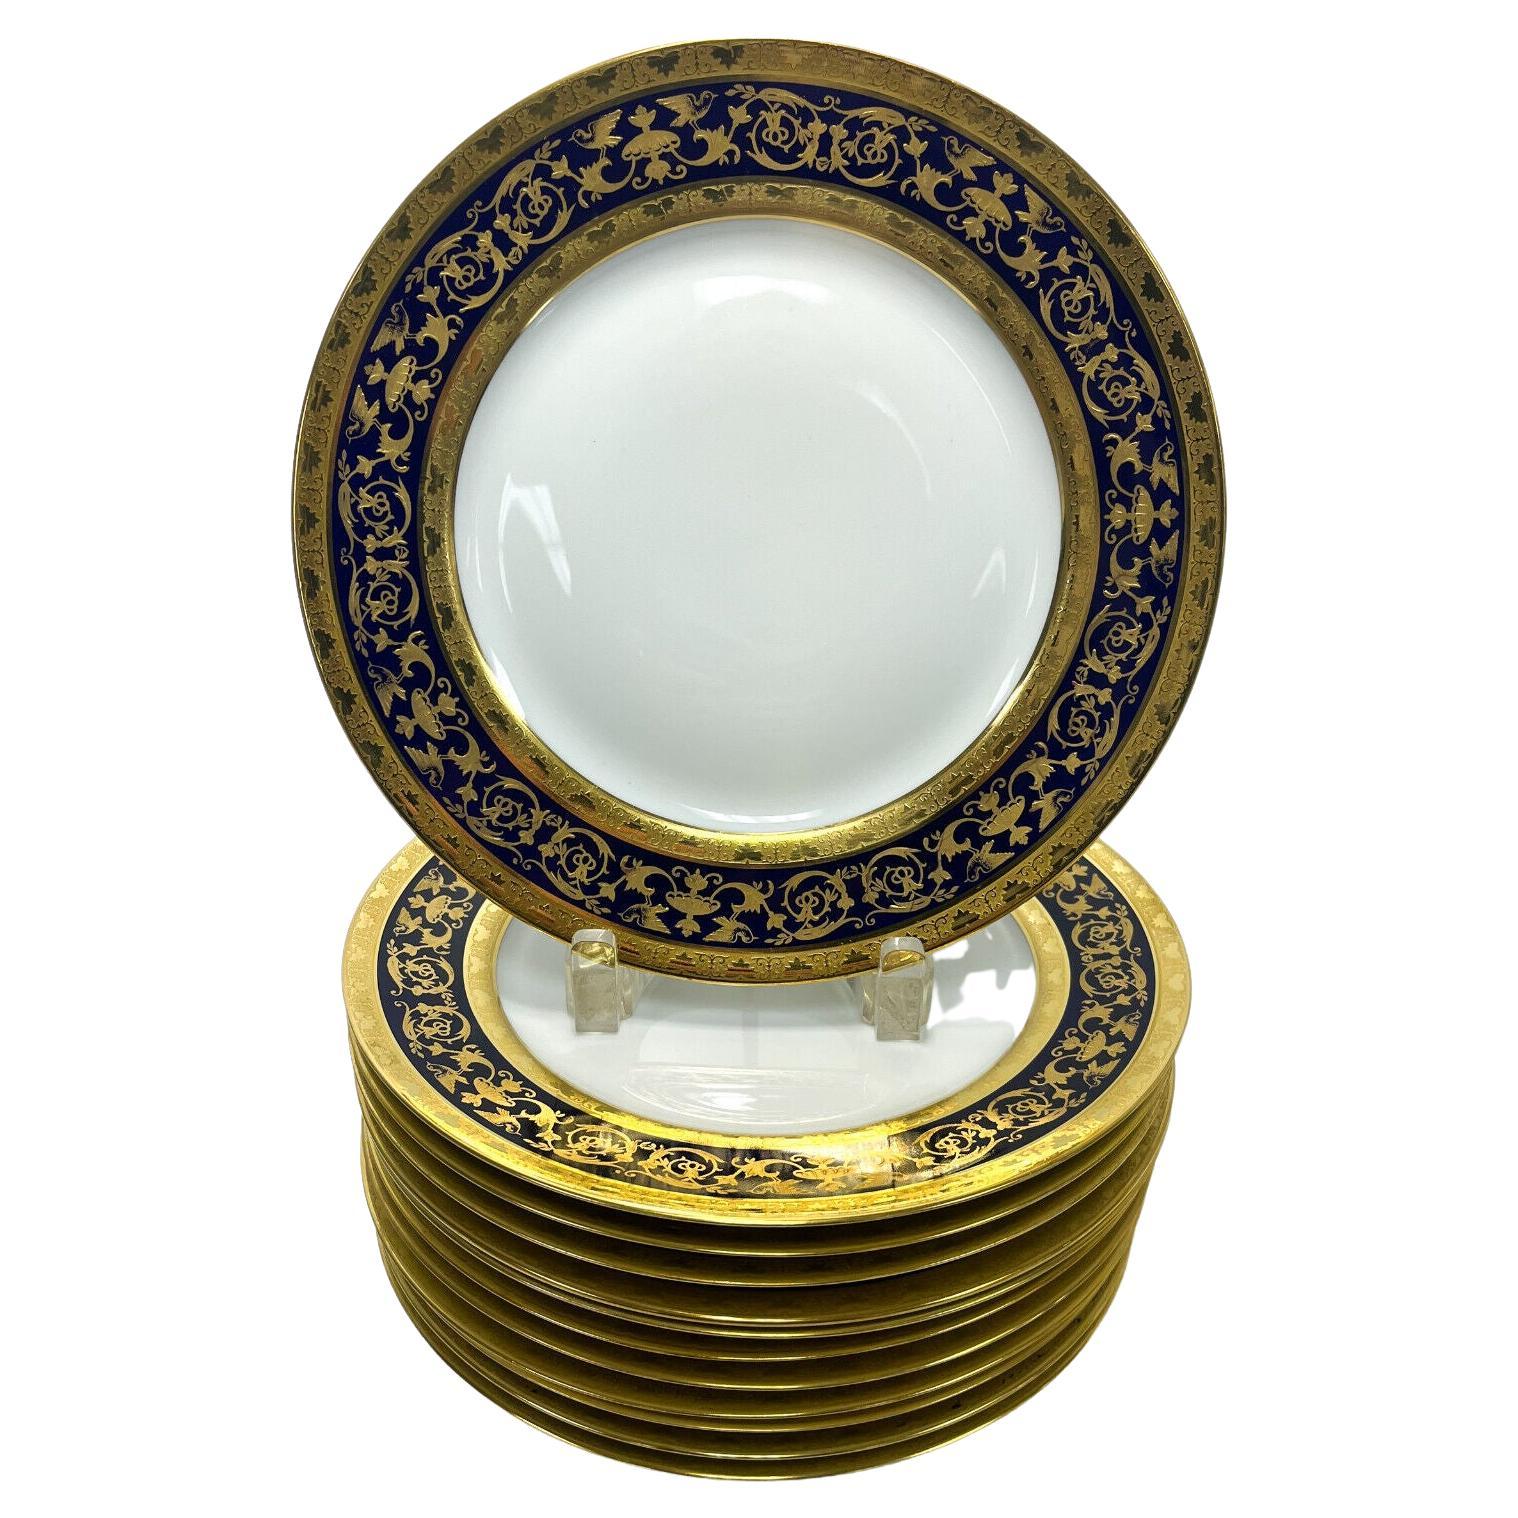  12 Limoges Raynaud Porcelain Dinner Plates in Pompei For Sale